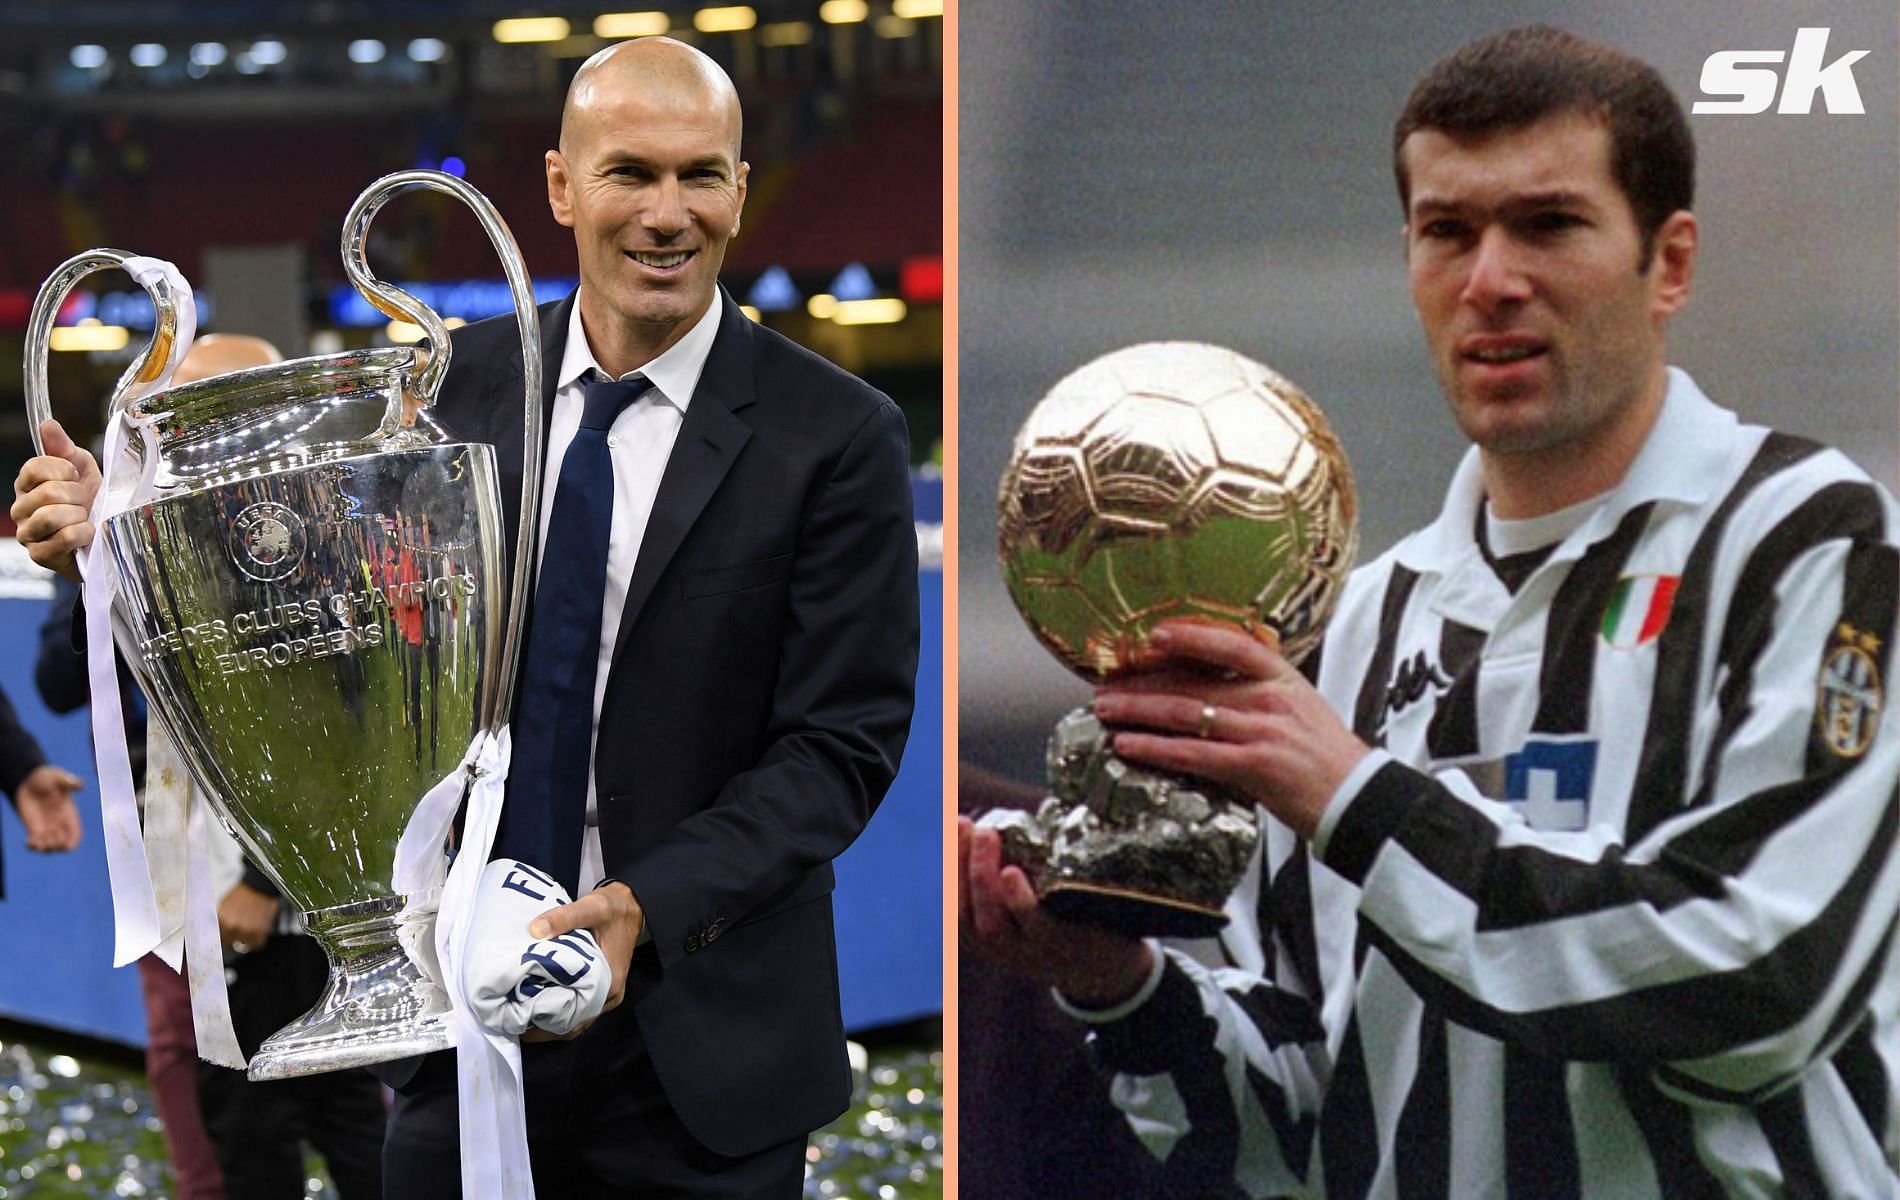 Ranking 5 Ballon d'Or winners who became successful managers